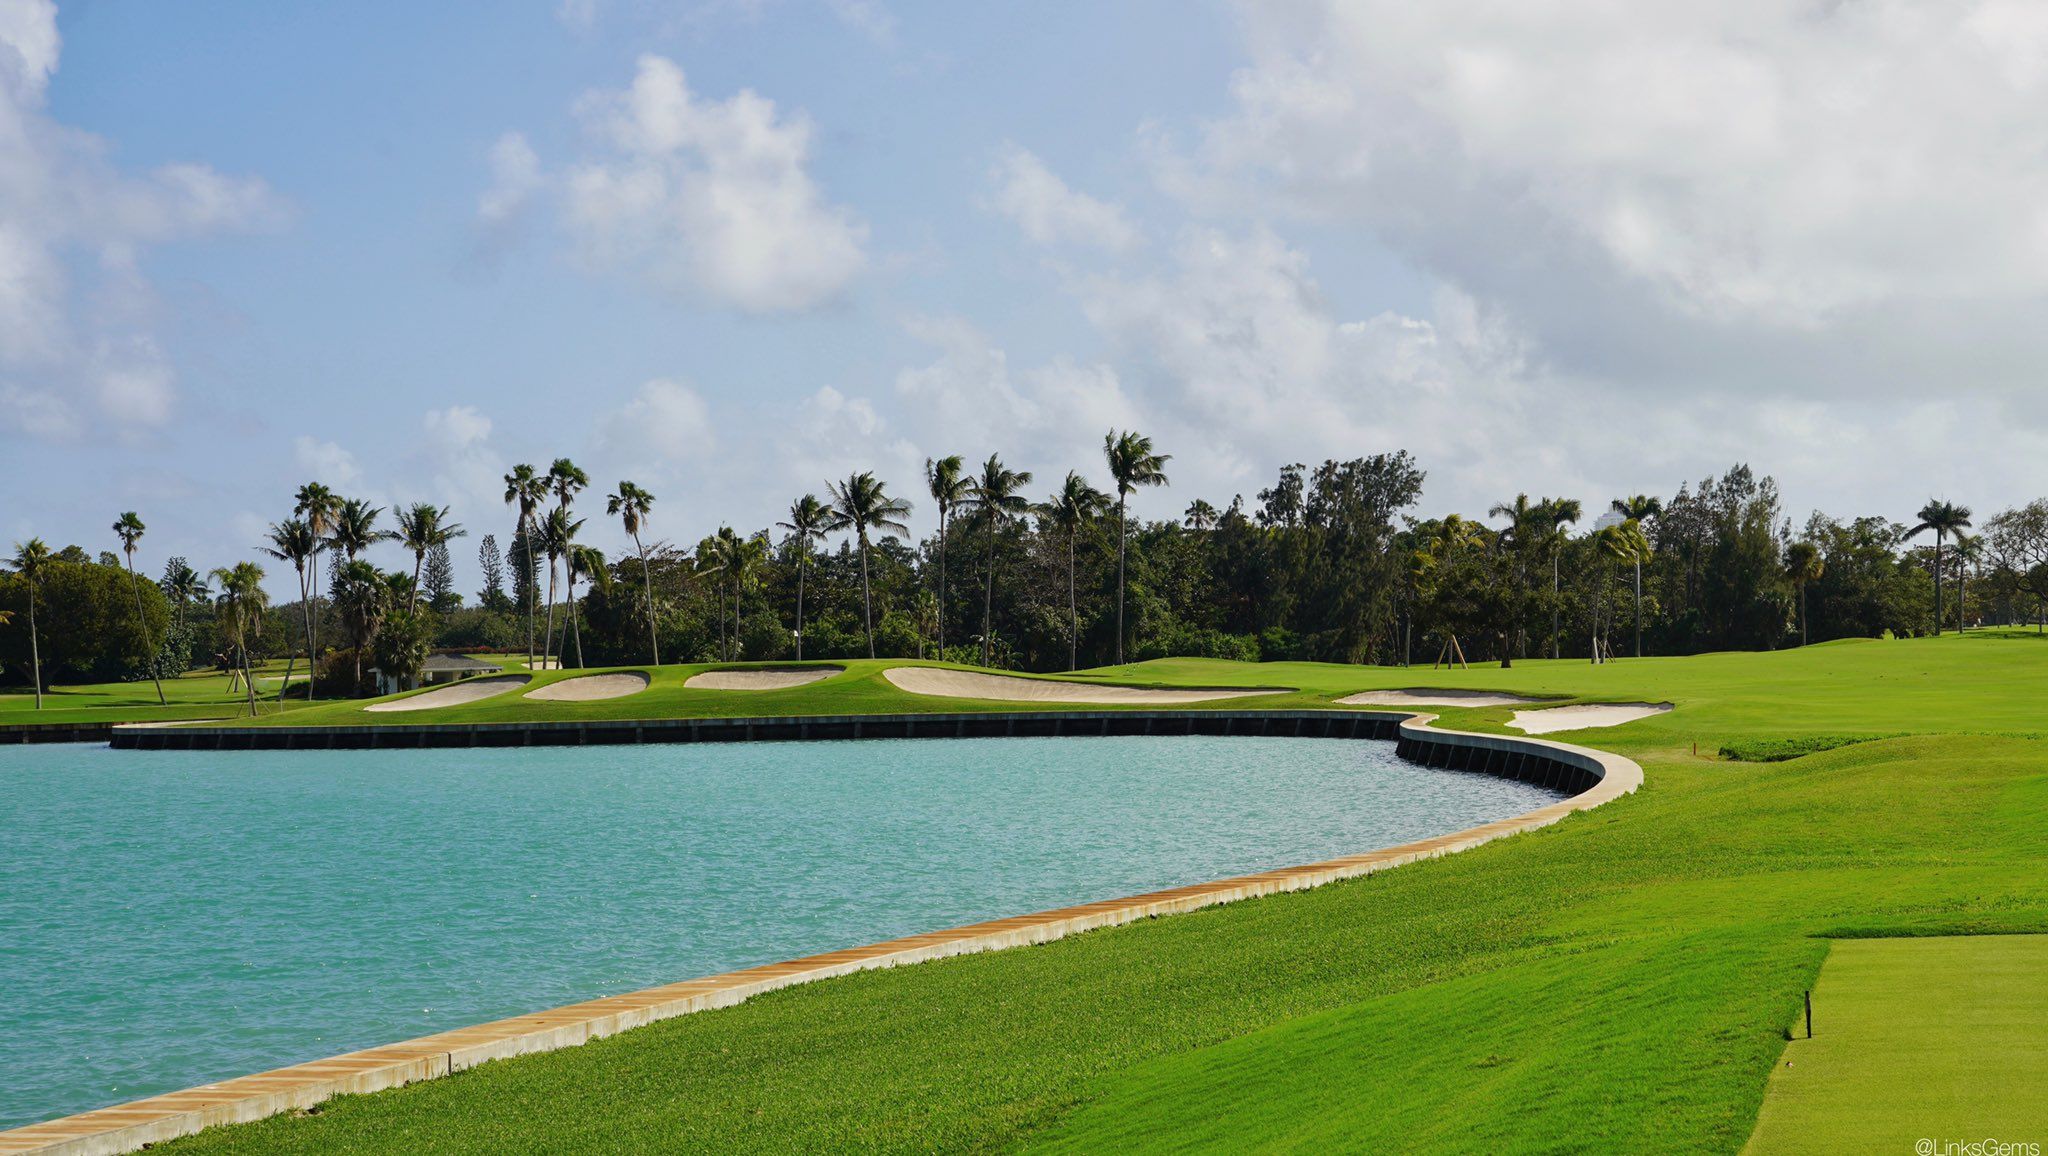 The golf course features a large lake and numerous trees